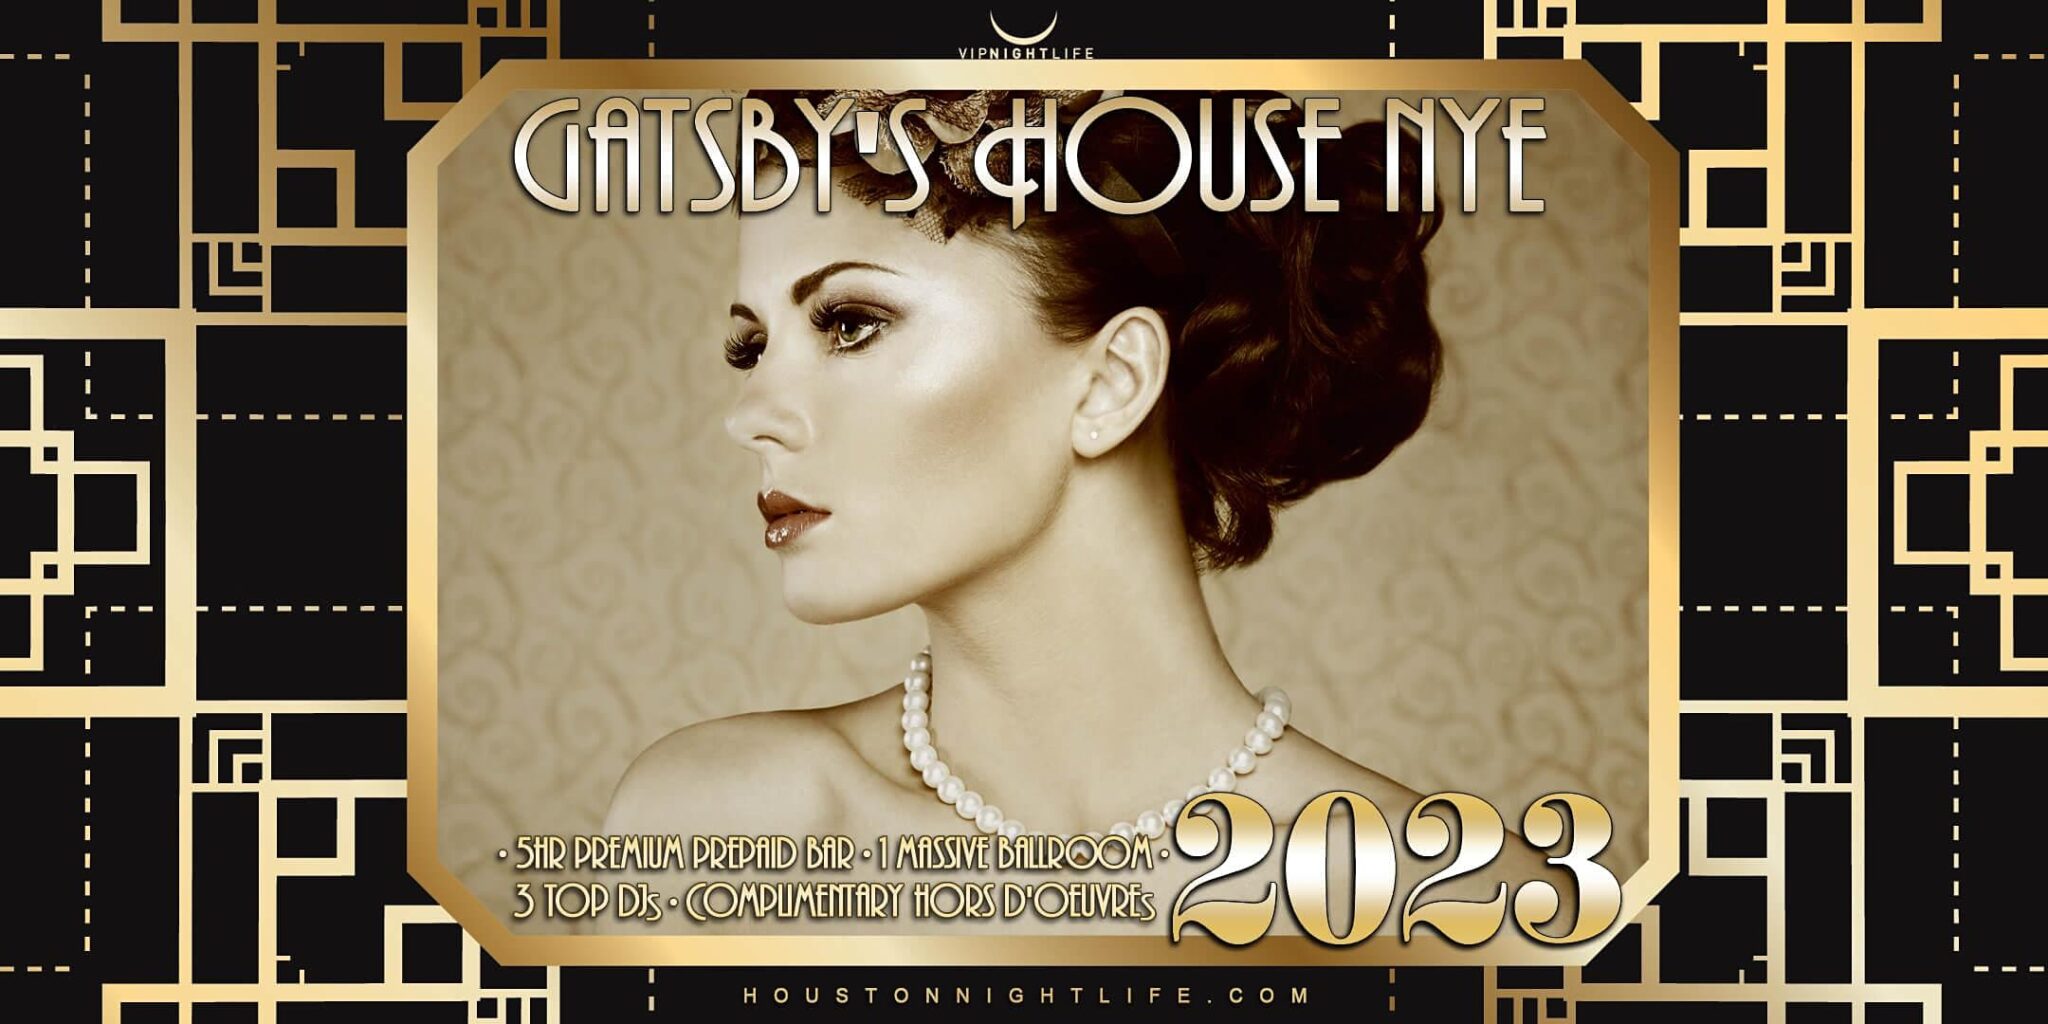 2023 Houston New Year's Eve Party Gatsby's House VIP Nightlife